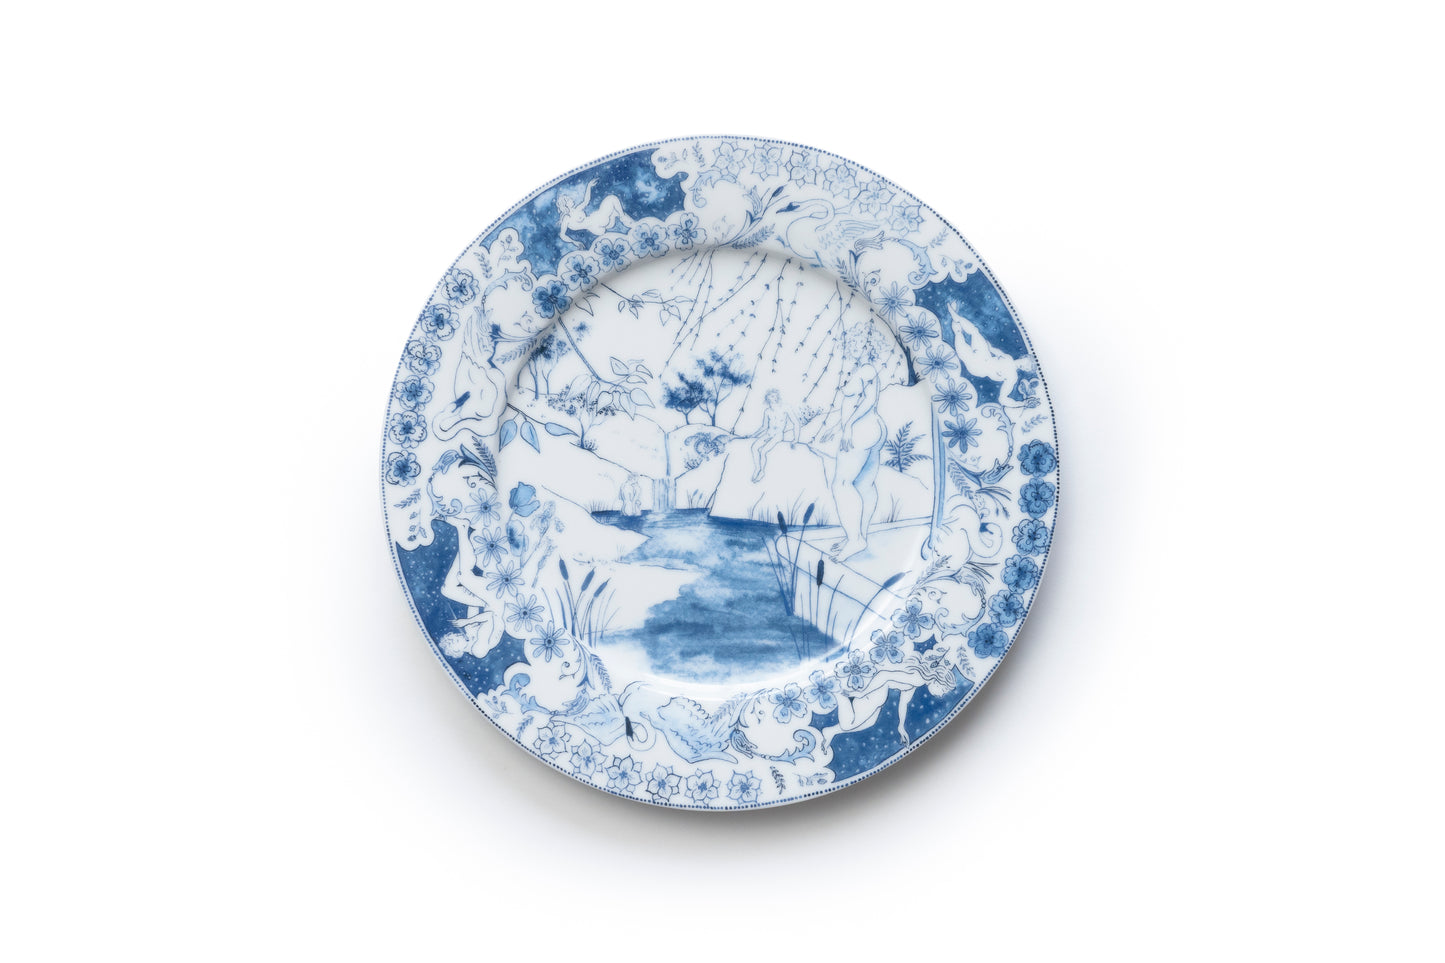 Blue and white porcelain plate with human figure and nature elements